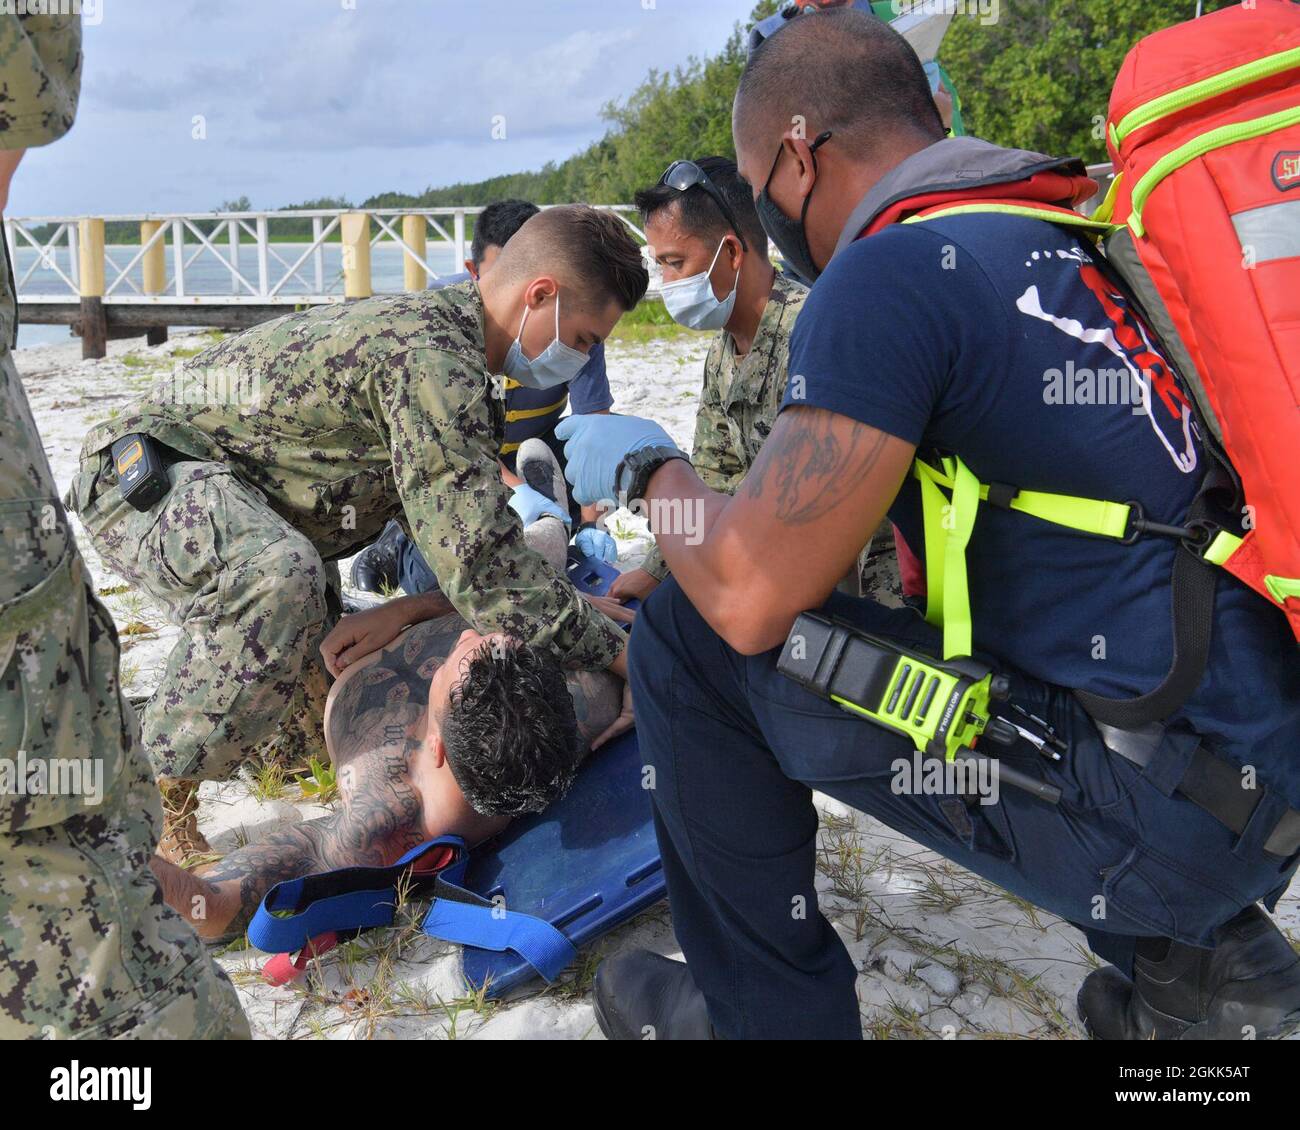 DIEGO GARCIA, British Indian Ocean Territory (May 12, 2021) – U.S. Navy Sailors along with first responders lift a wounded shark attack victim on to a stretcher during a drill on Diego Garcia, May 12, 2021. U.S. Navy Support Facility Diego Garcia provides logistic, service, recreational and administrative support to U.S. and allied forces forward deployed to the Indian Ocean and Arabian Gulf. Stock Photo